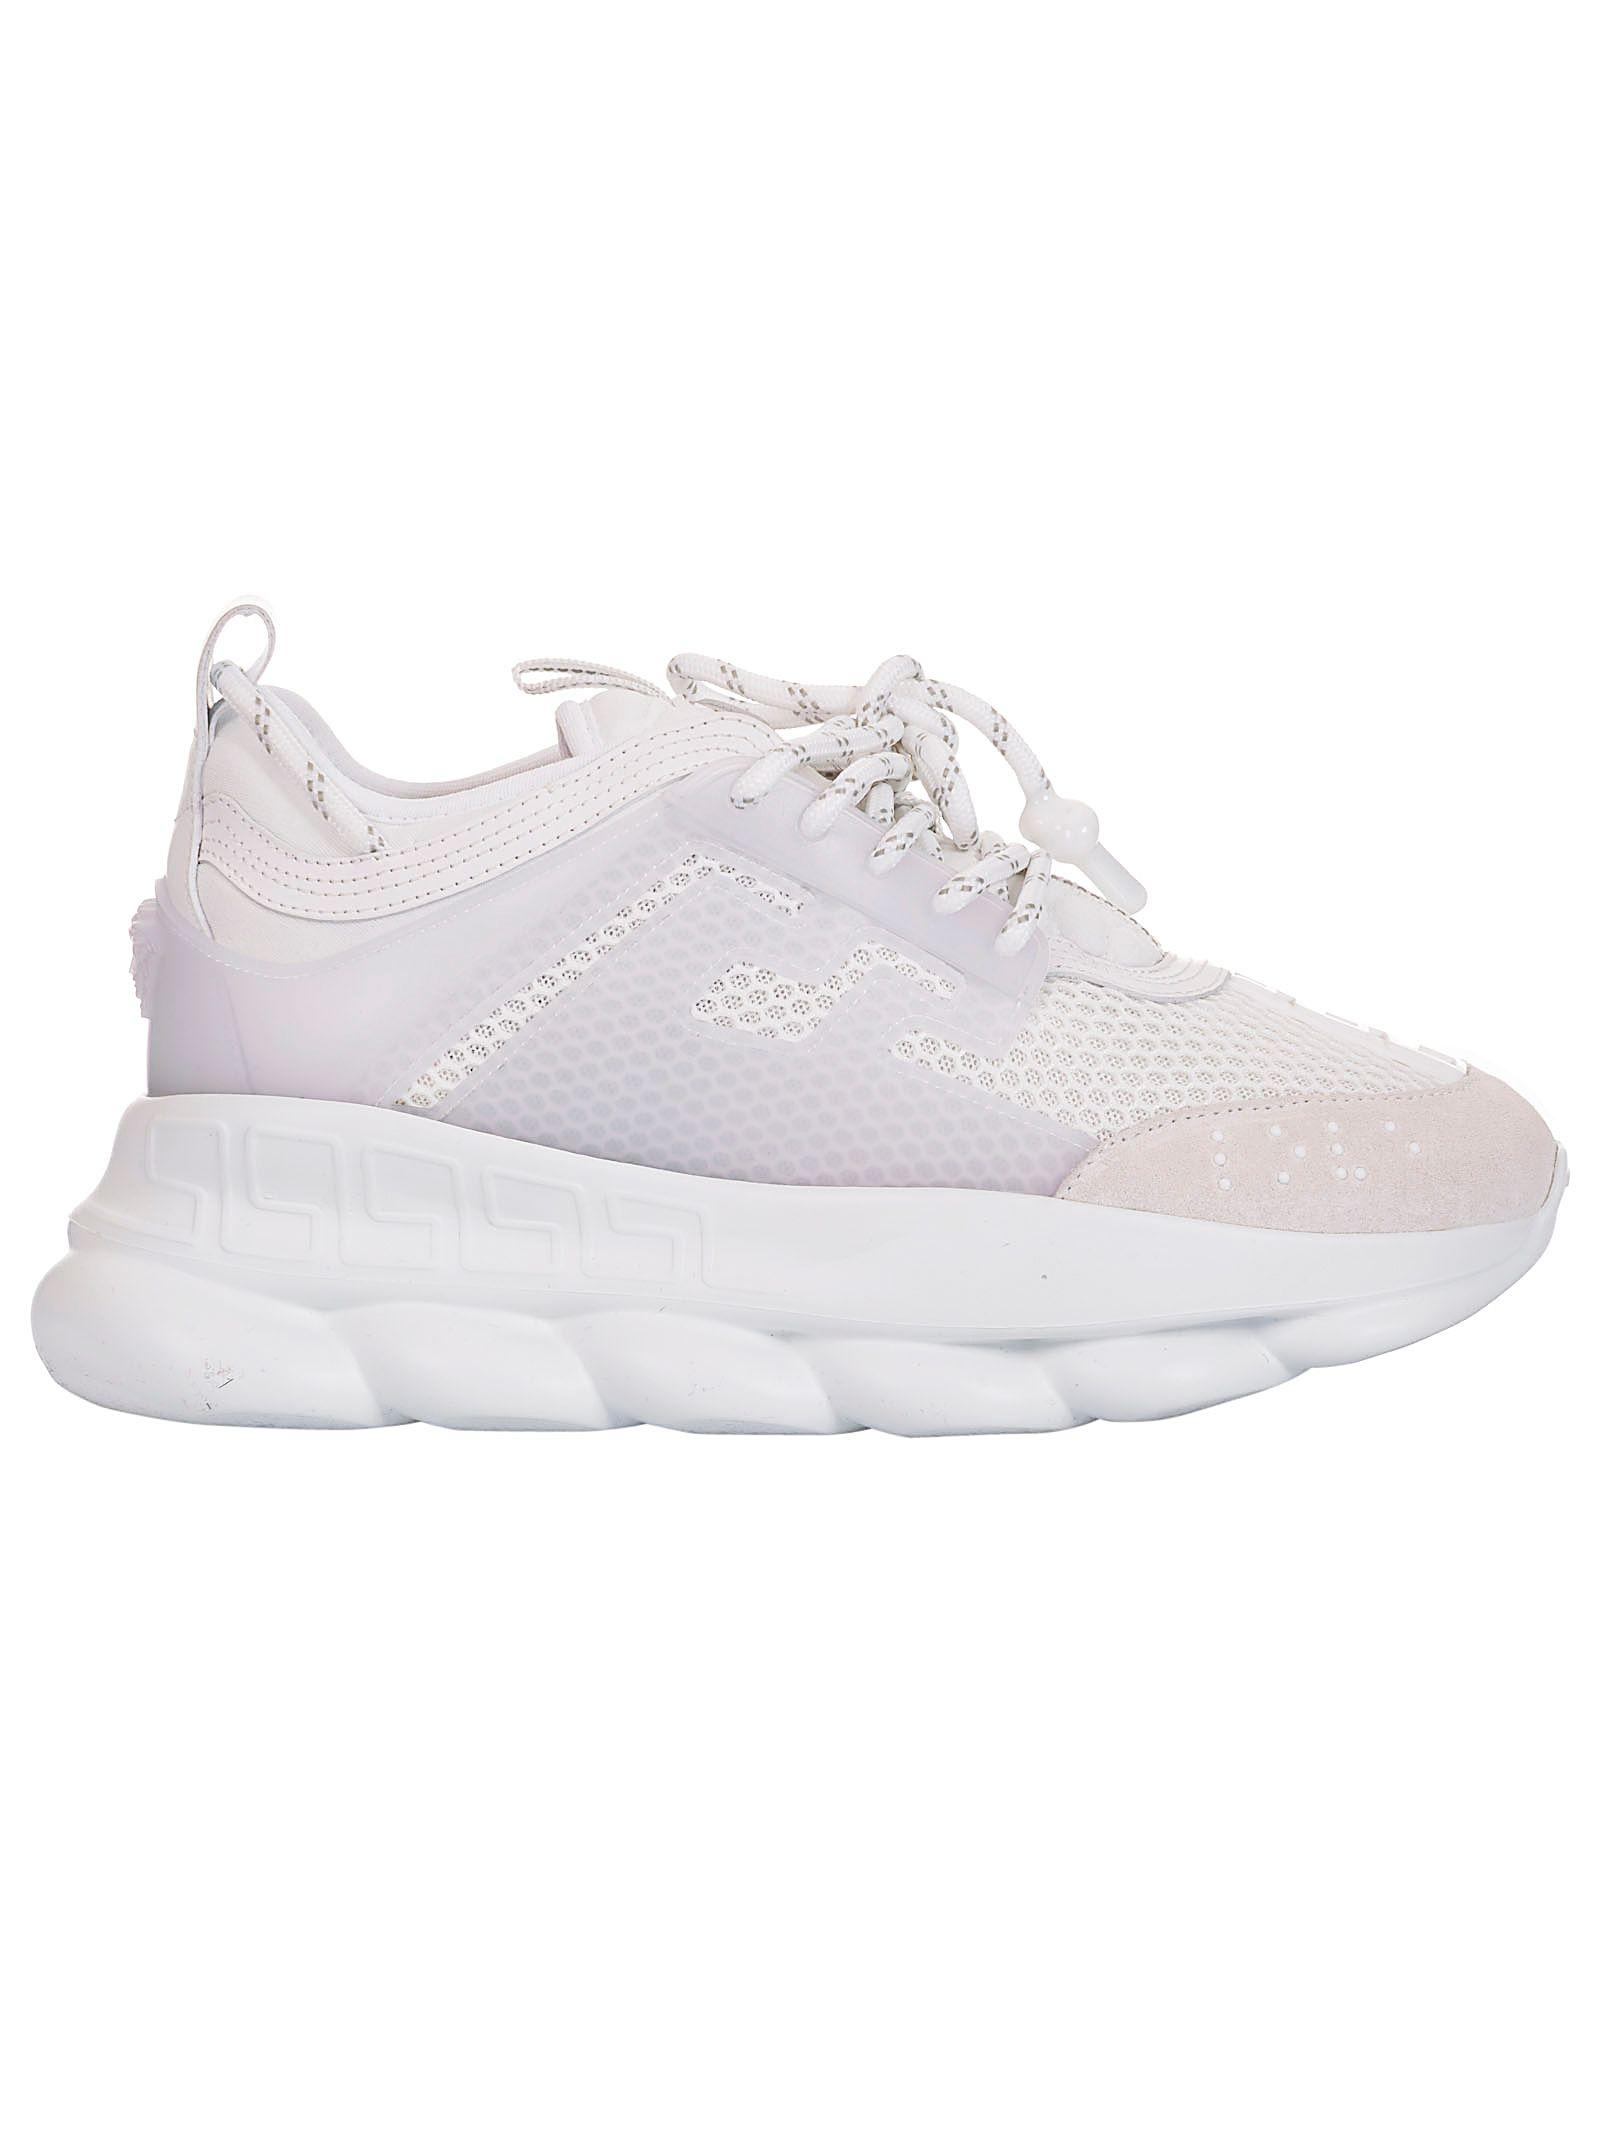 Versace White Pvc Sneakers in White - Lyst